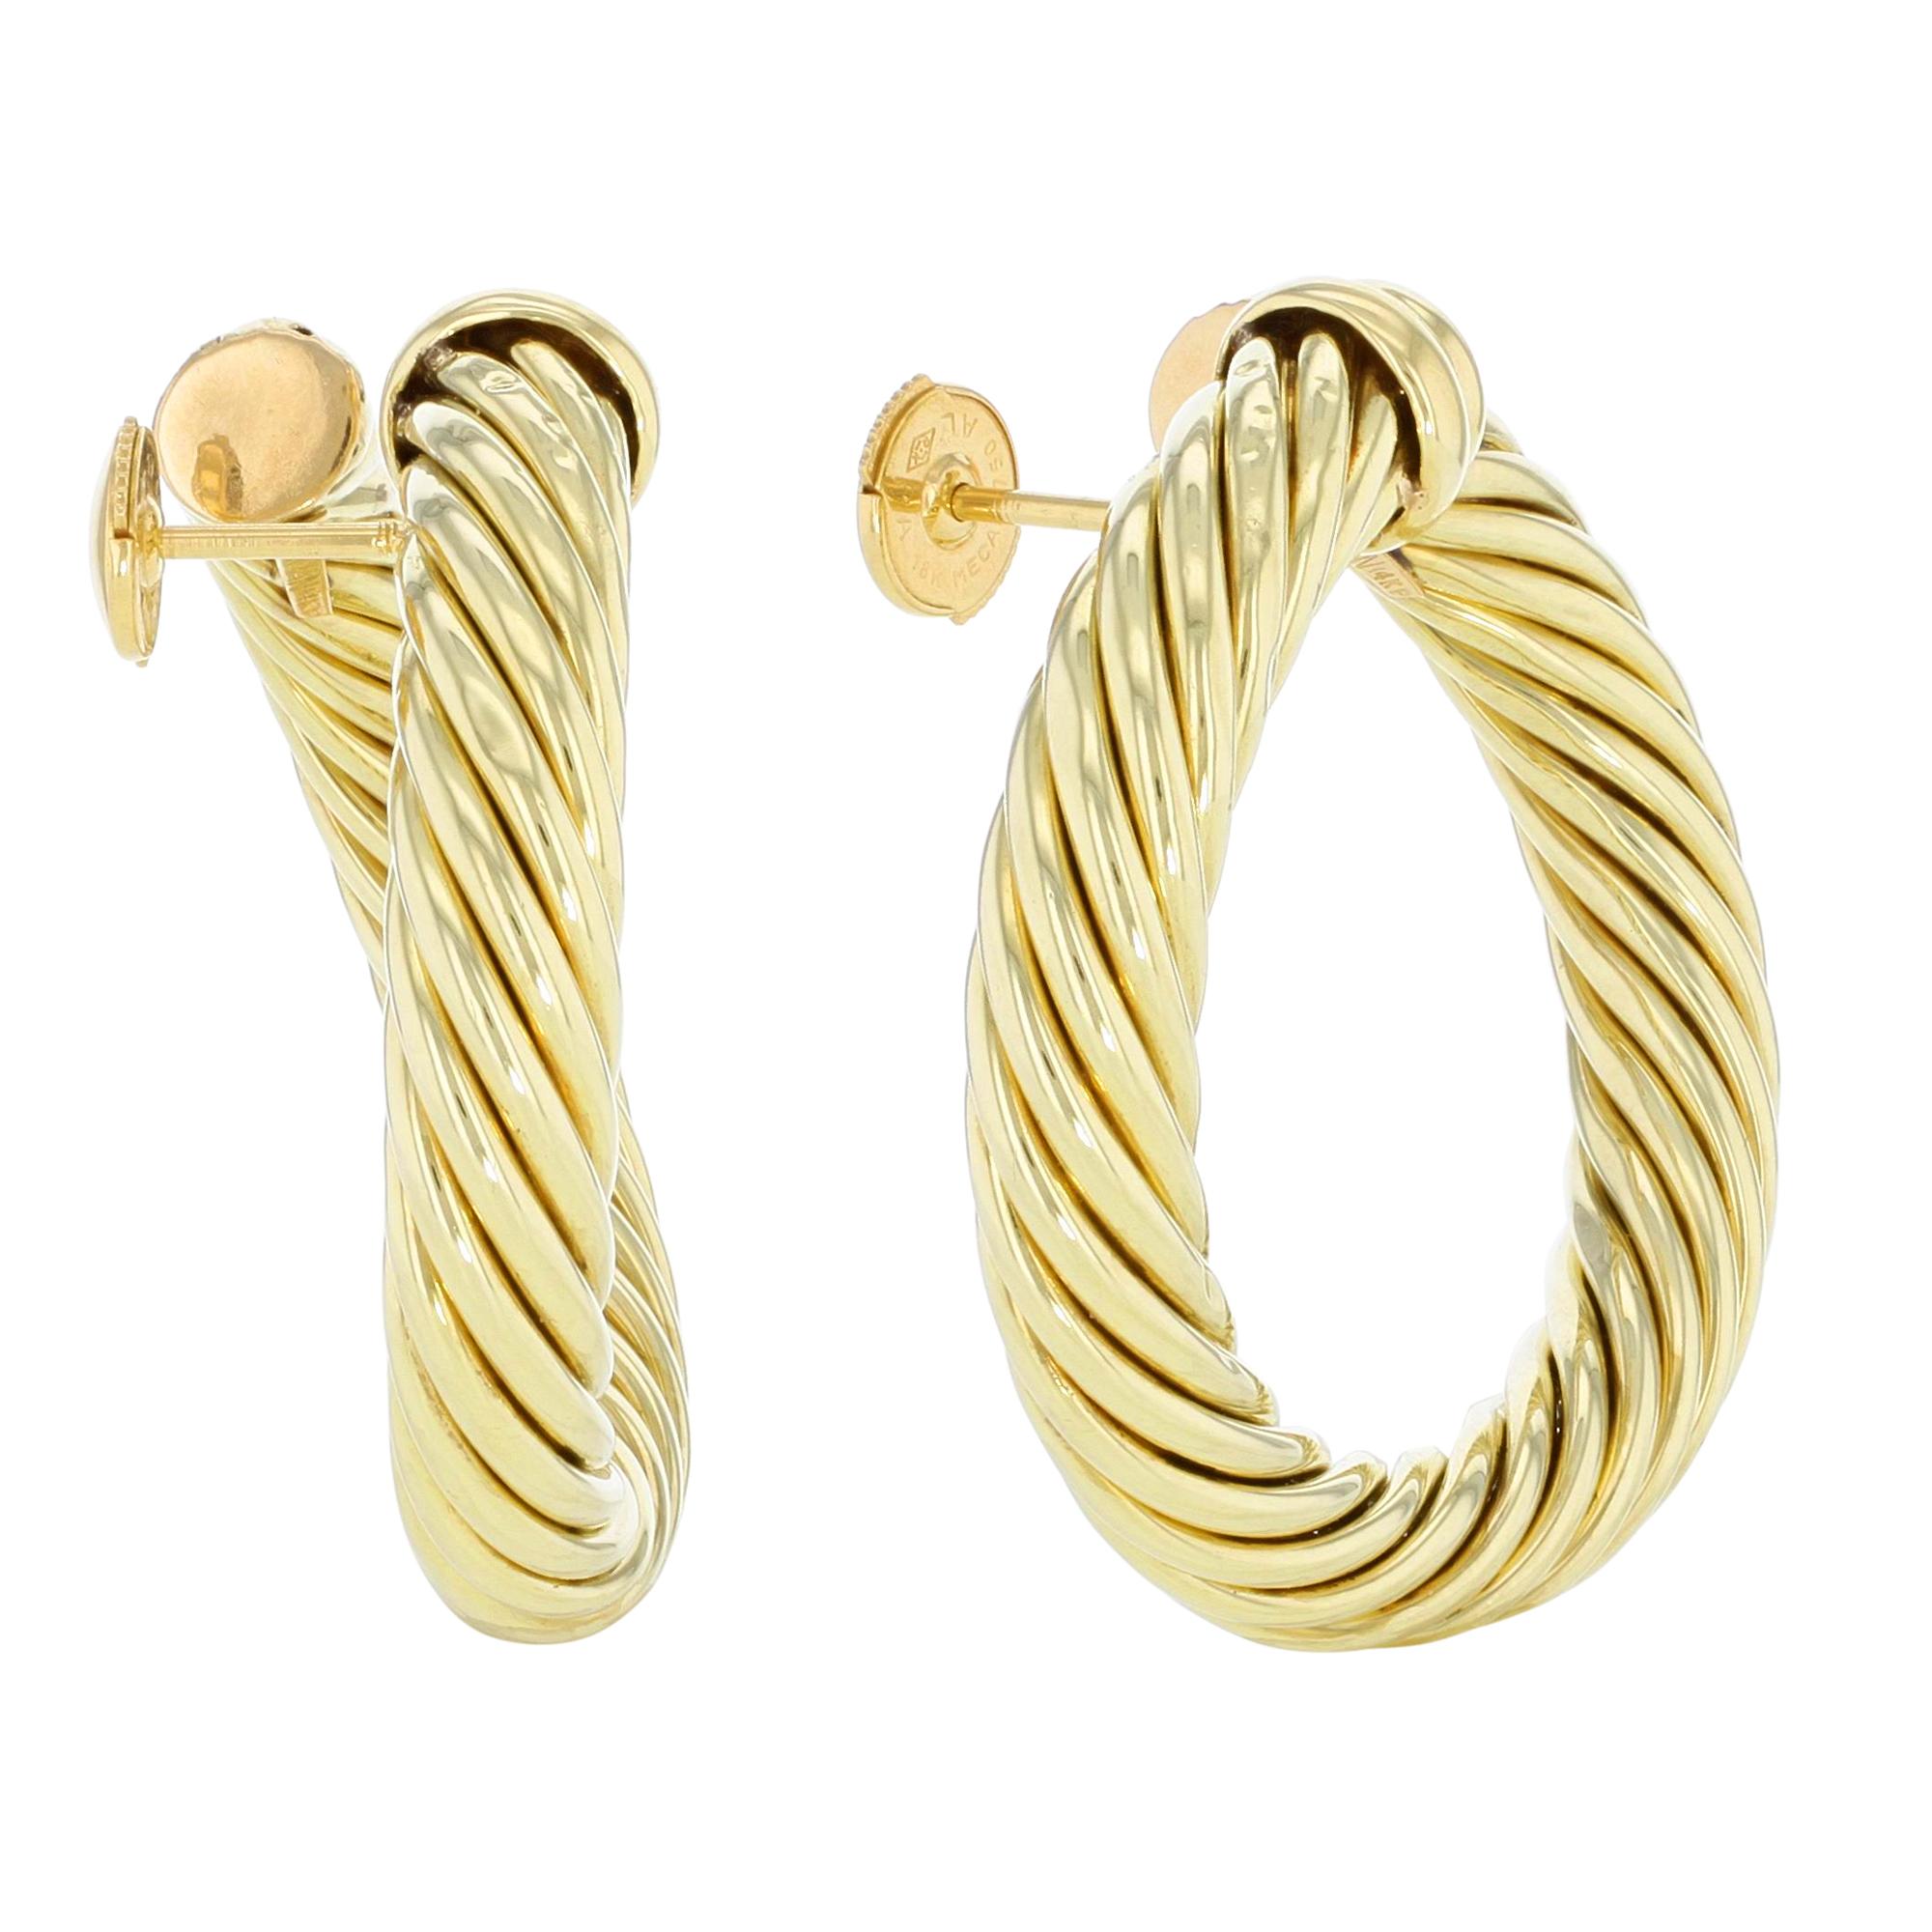 These David Yurman Classic Cable earrings are crafted in 18k yellow gold. Earring size: 40mm. Thickness: 7mm. Weight 22 g. Pre-owned like new, original packaging is not included, comes in our presentation box. 

